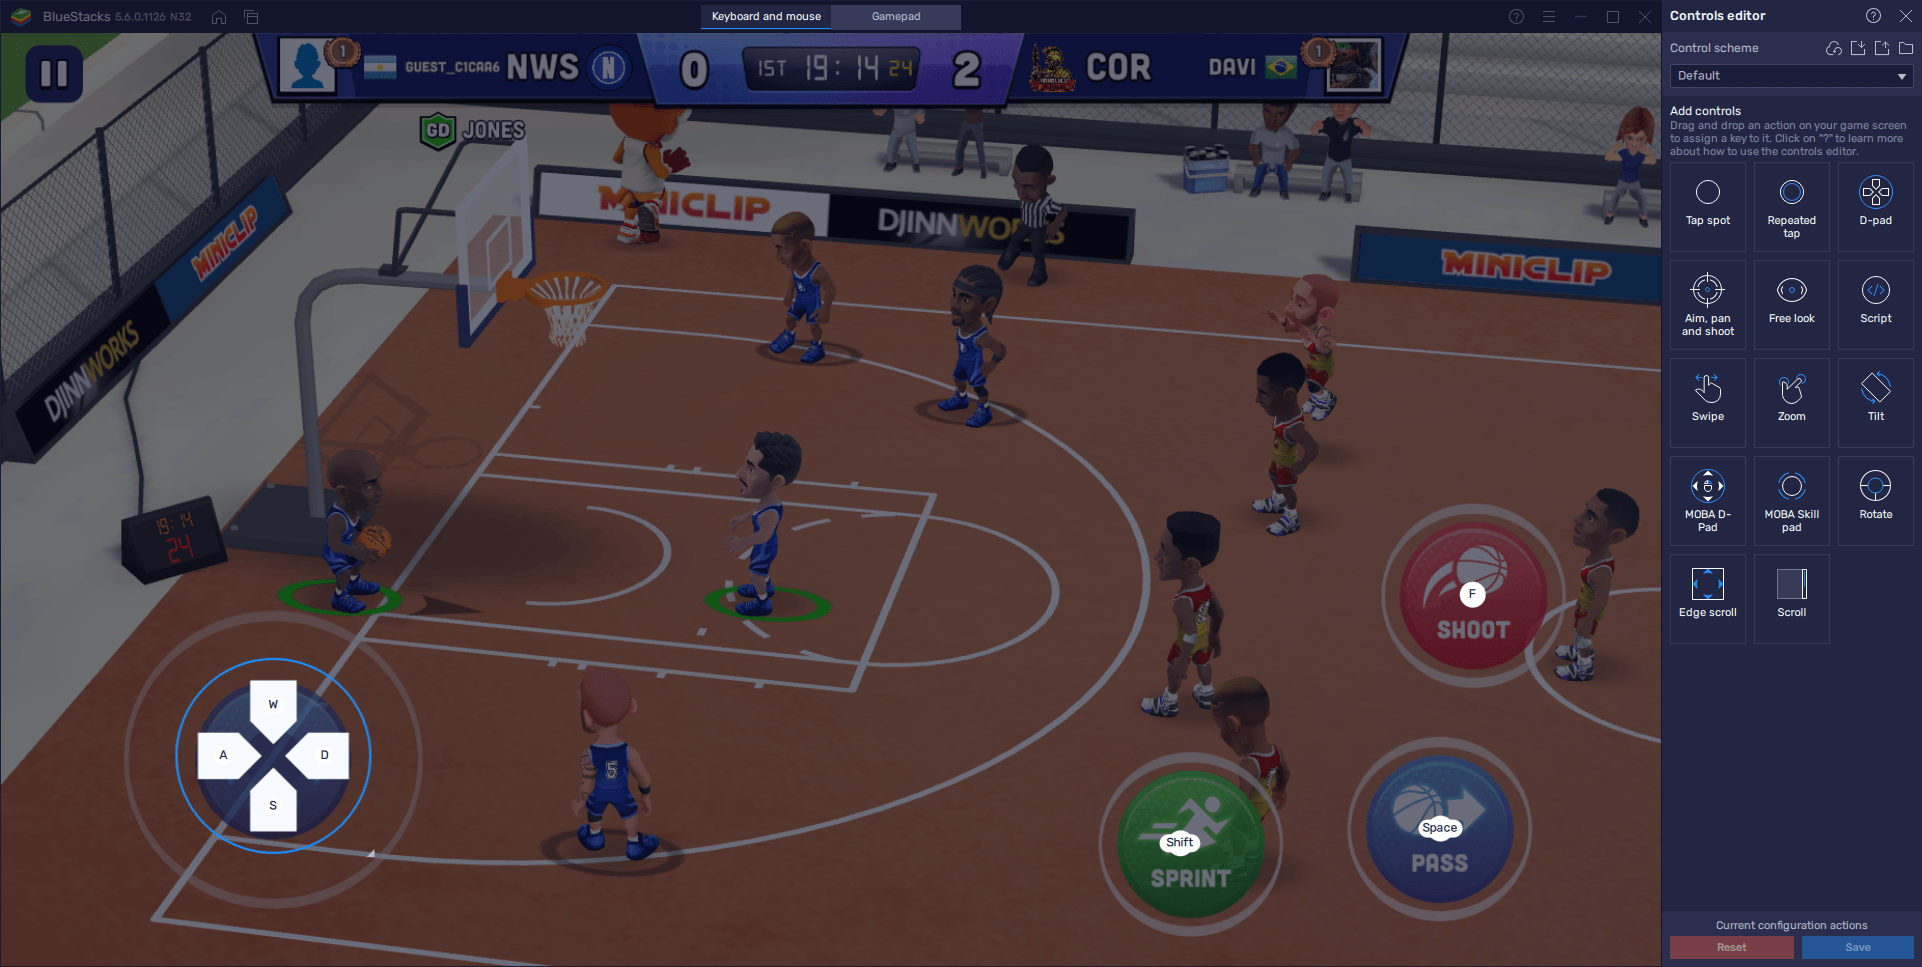 Mini Basketball on PC - How to get the Best Graphics and Performance, and Set Up Your Keyboard and Gamepad Controls